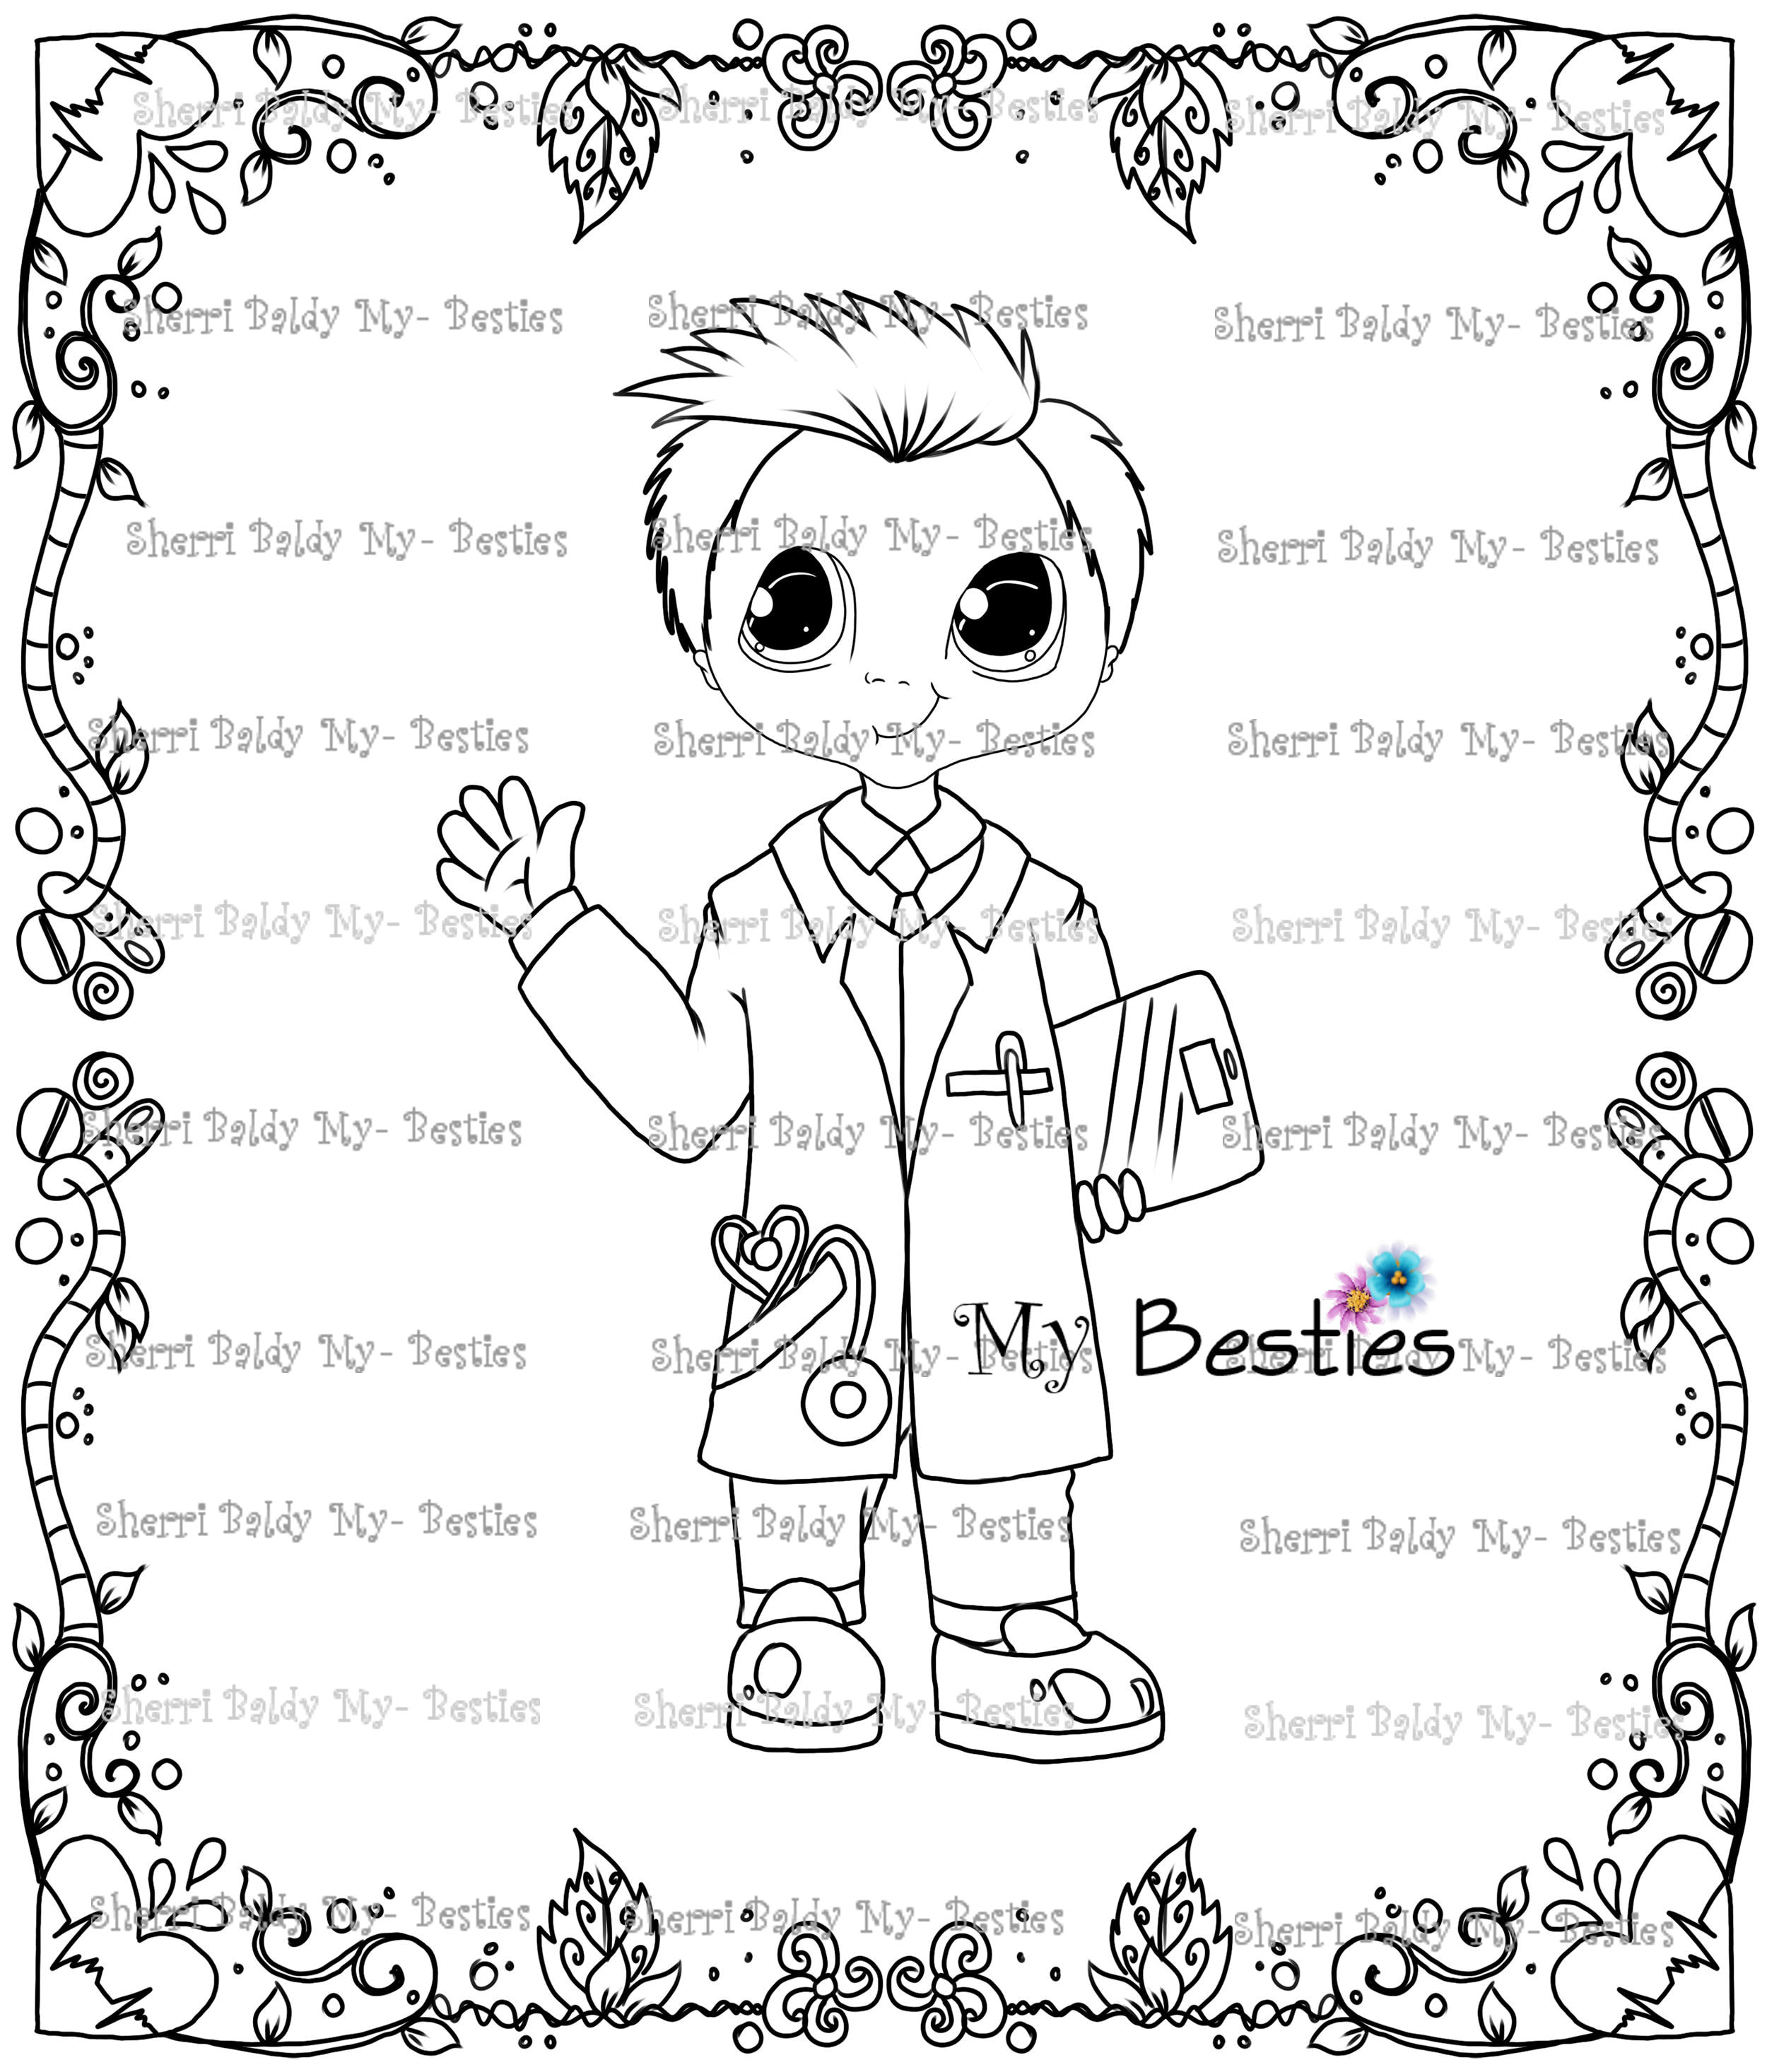 Download Instant Download My Besties Coloring Page Doll 11~Digi "Dr ~RX Nurse Get Well Besties" ~ My ...